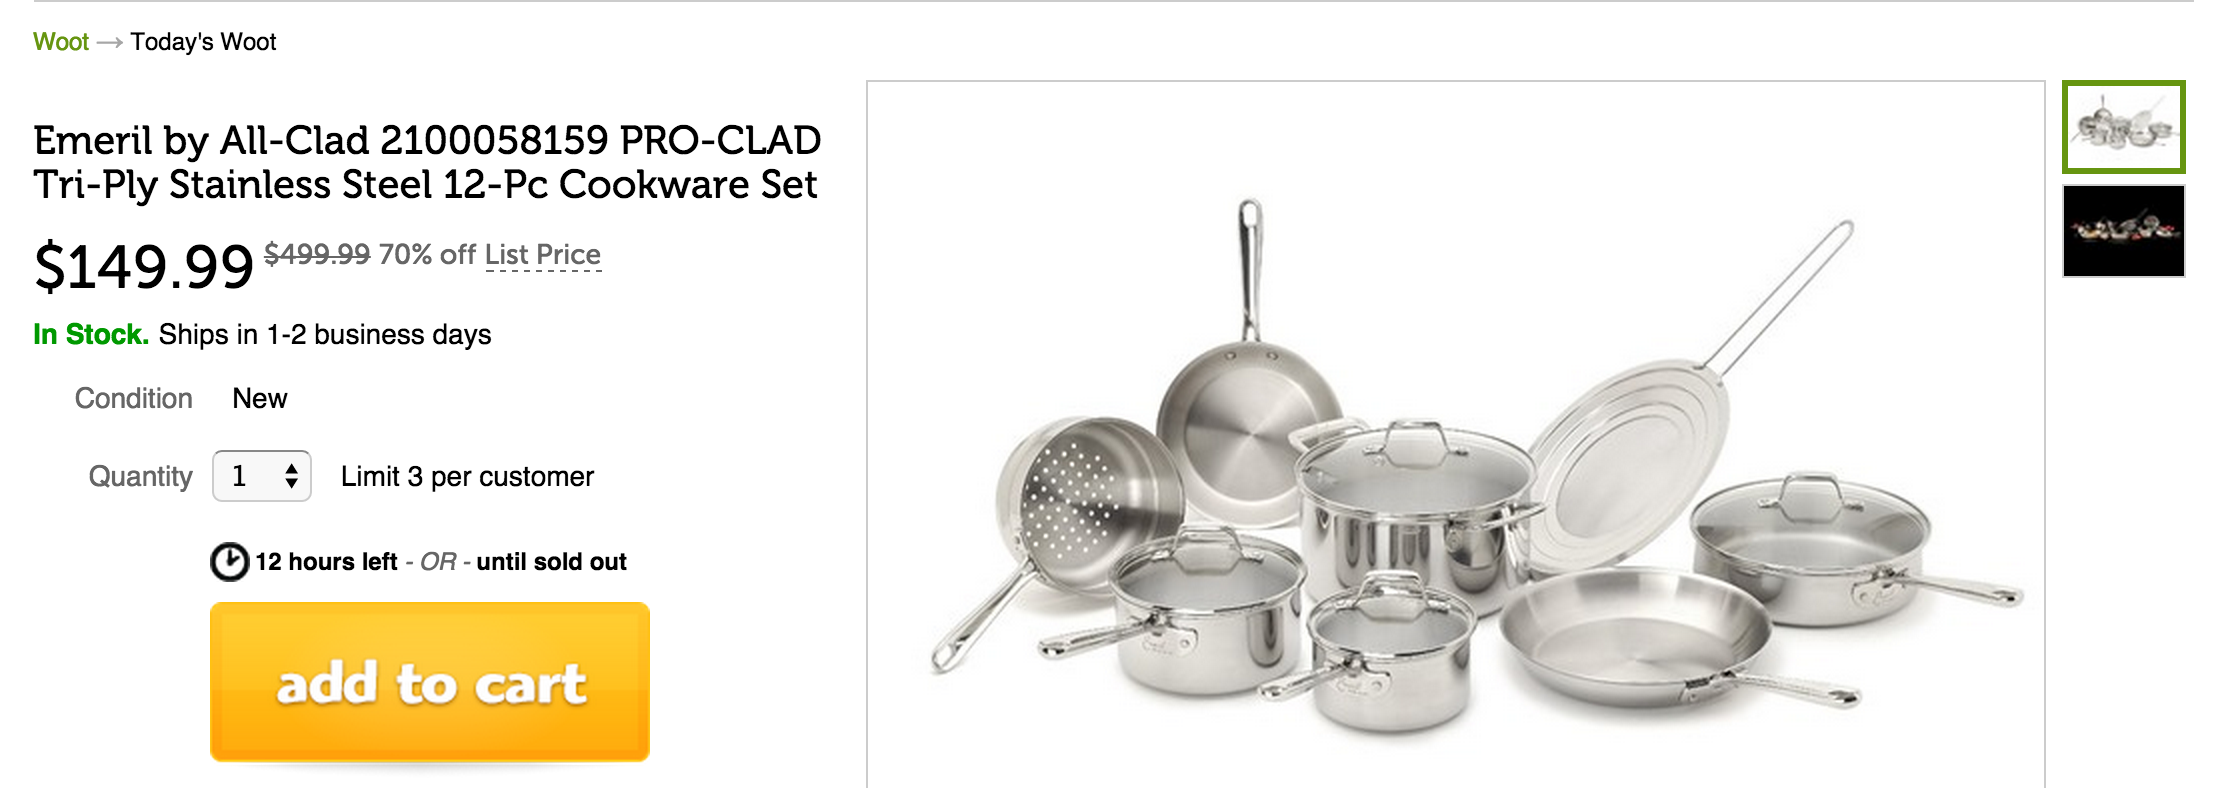 https://9to5toys.com/wp-content/uploads/sites/5/2015/04/emeril-by-all-clad-tri-ply-stainless-steel-12-pc-cookware-set-2100058159-sale-02.png